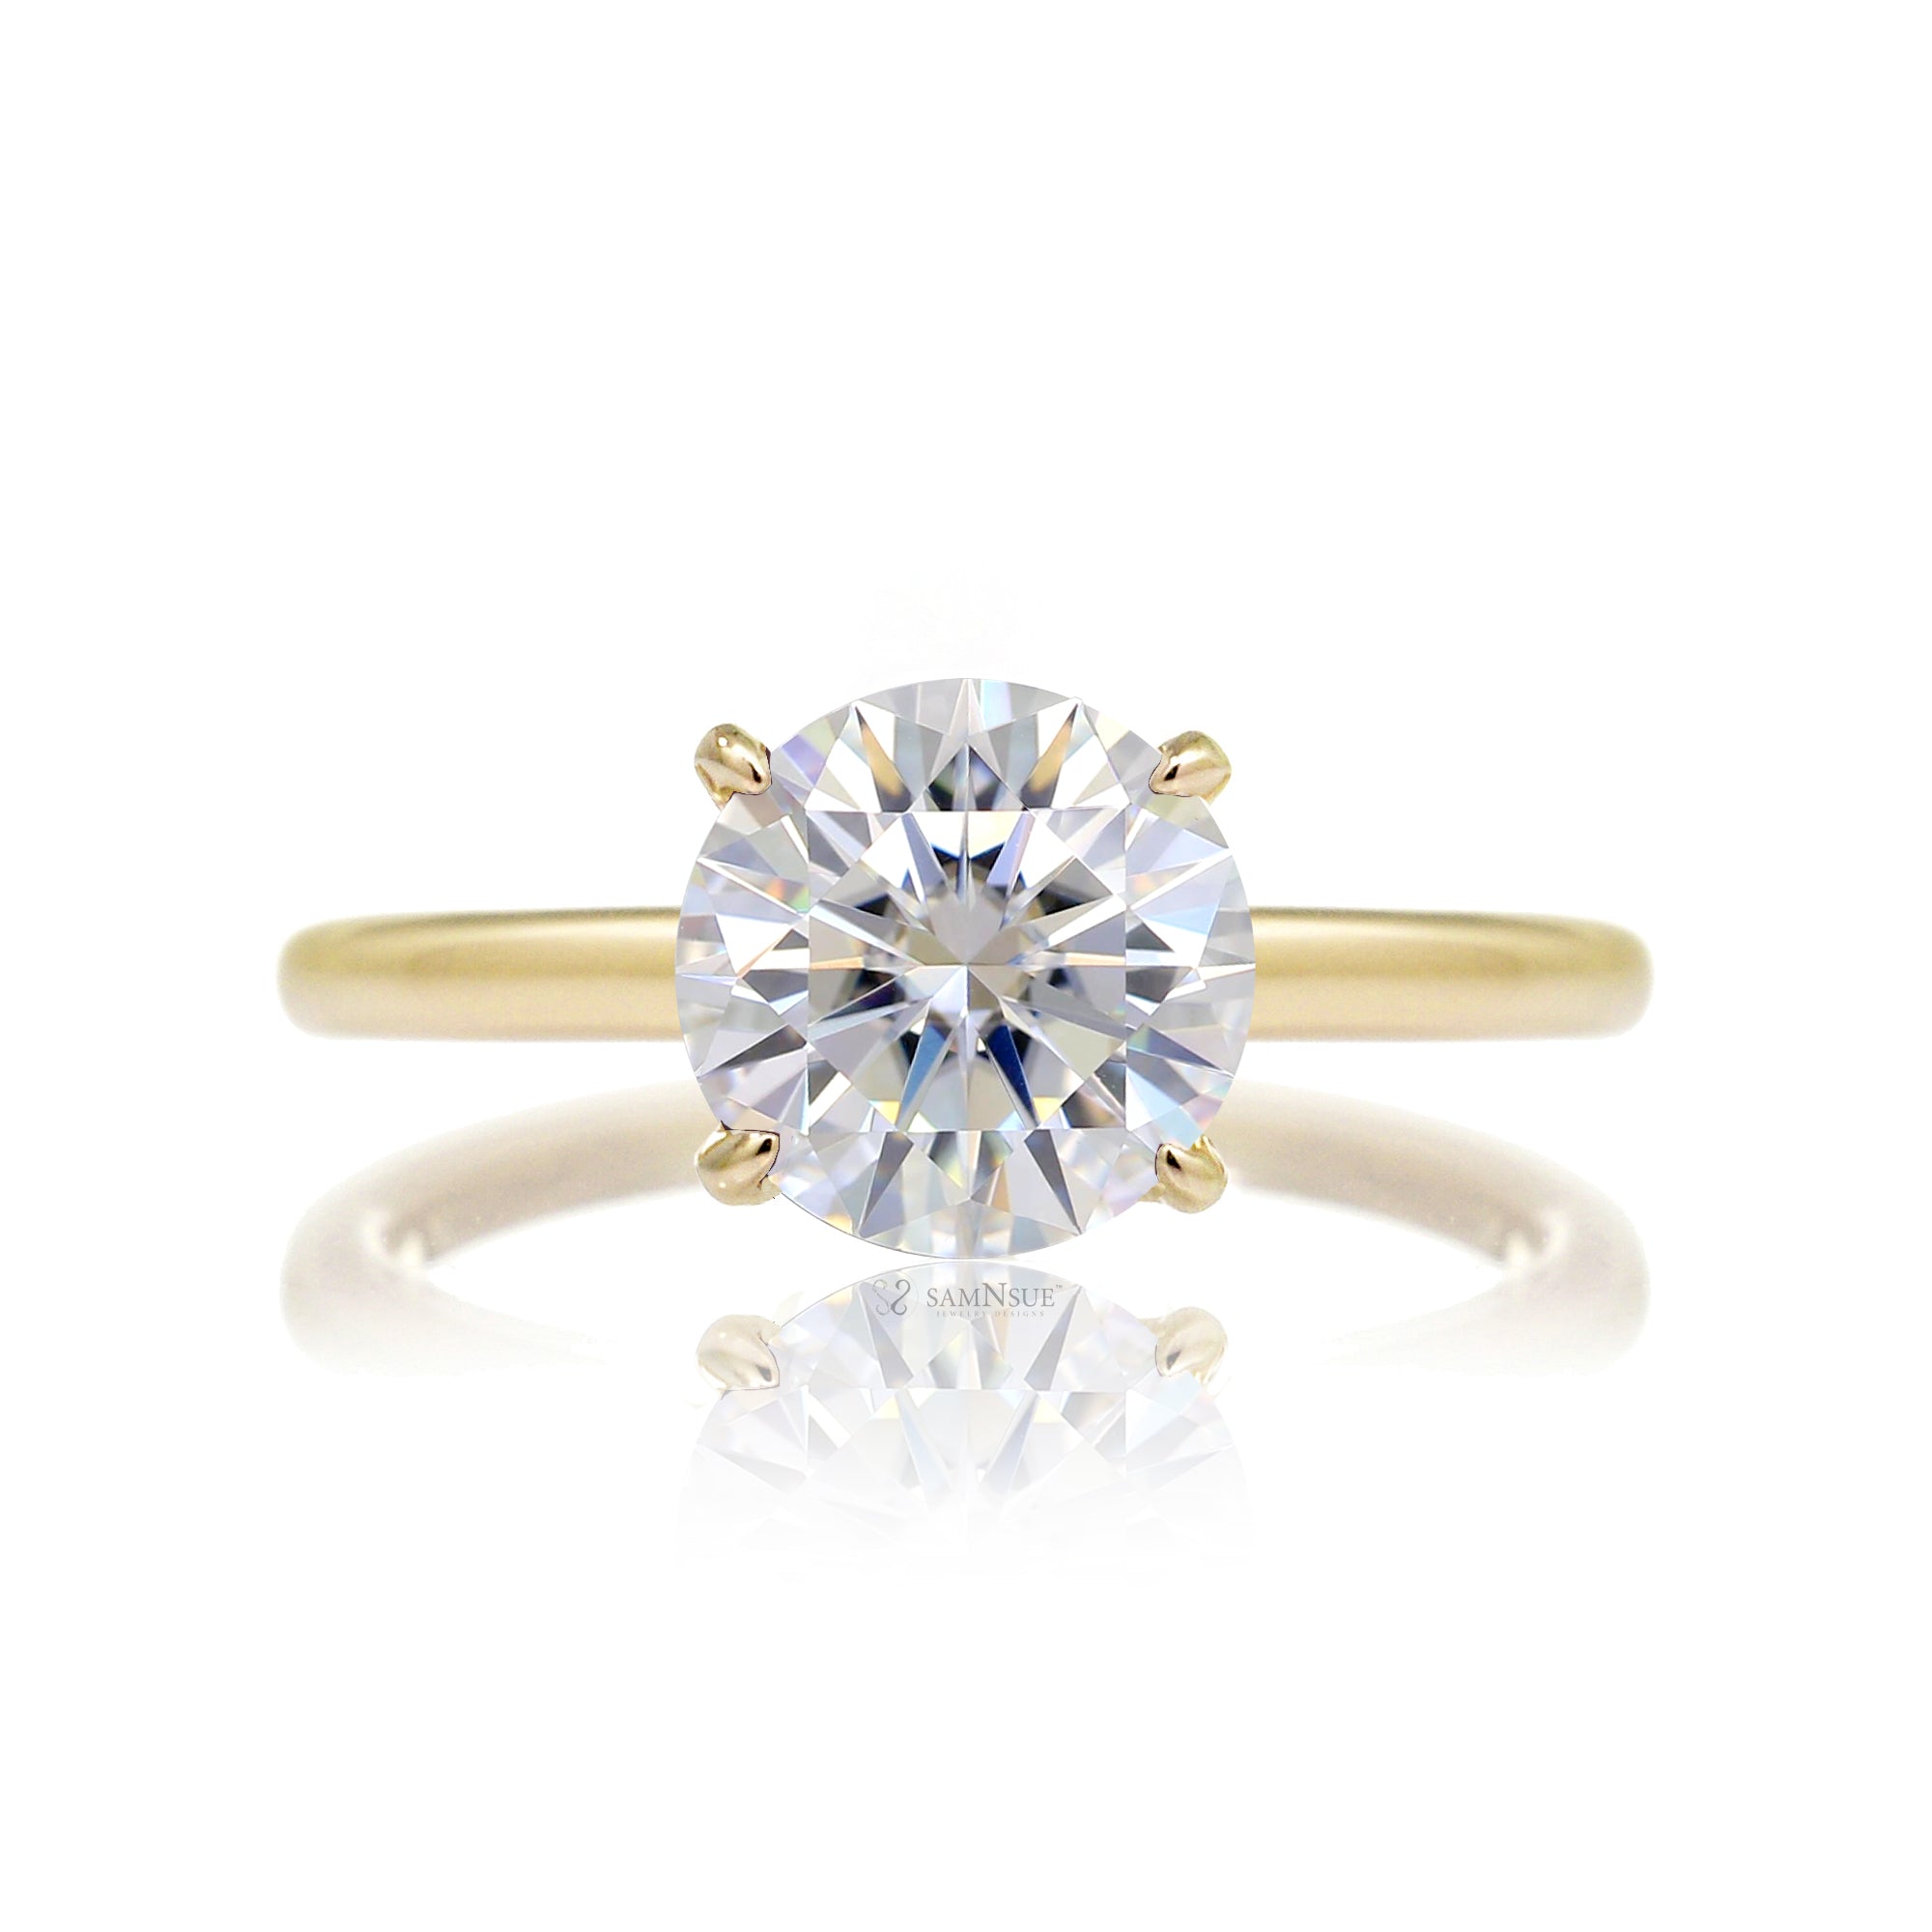 Round cut solitaire diamond engagement ring with a hidden halo and solid polished band in yellow gold